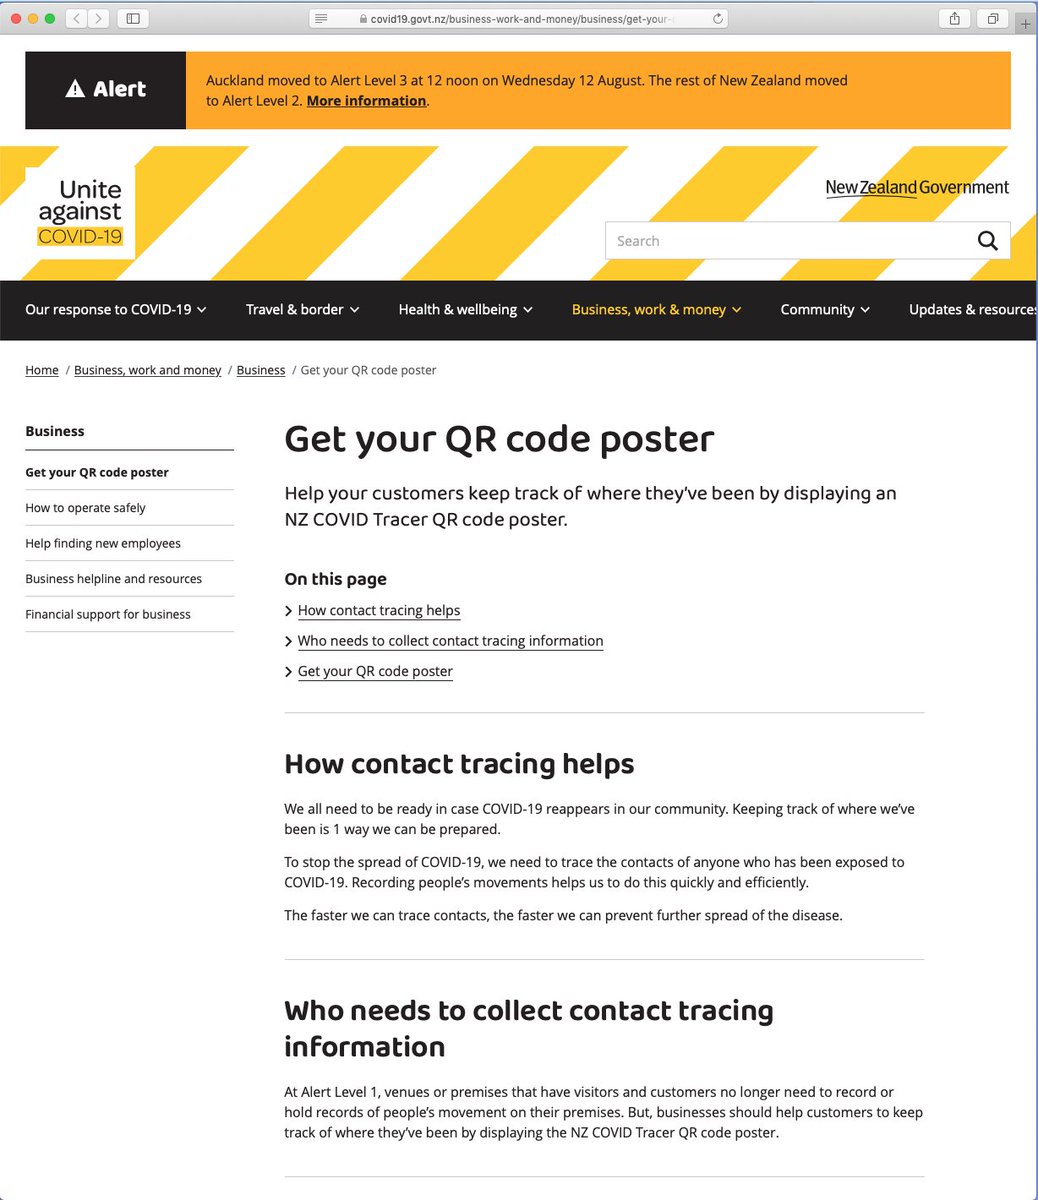 For anyone else finding this thread as a home business, this looks like a reasonable place to start getting your QR code.But the descriptive text is in need of updating for the “about to be mandatory” level 2/3 status :-) https://covid19.govt.nz/business-work-and-money/business/get-your-qr-code-poster/